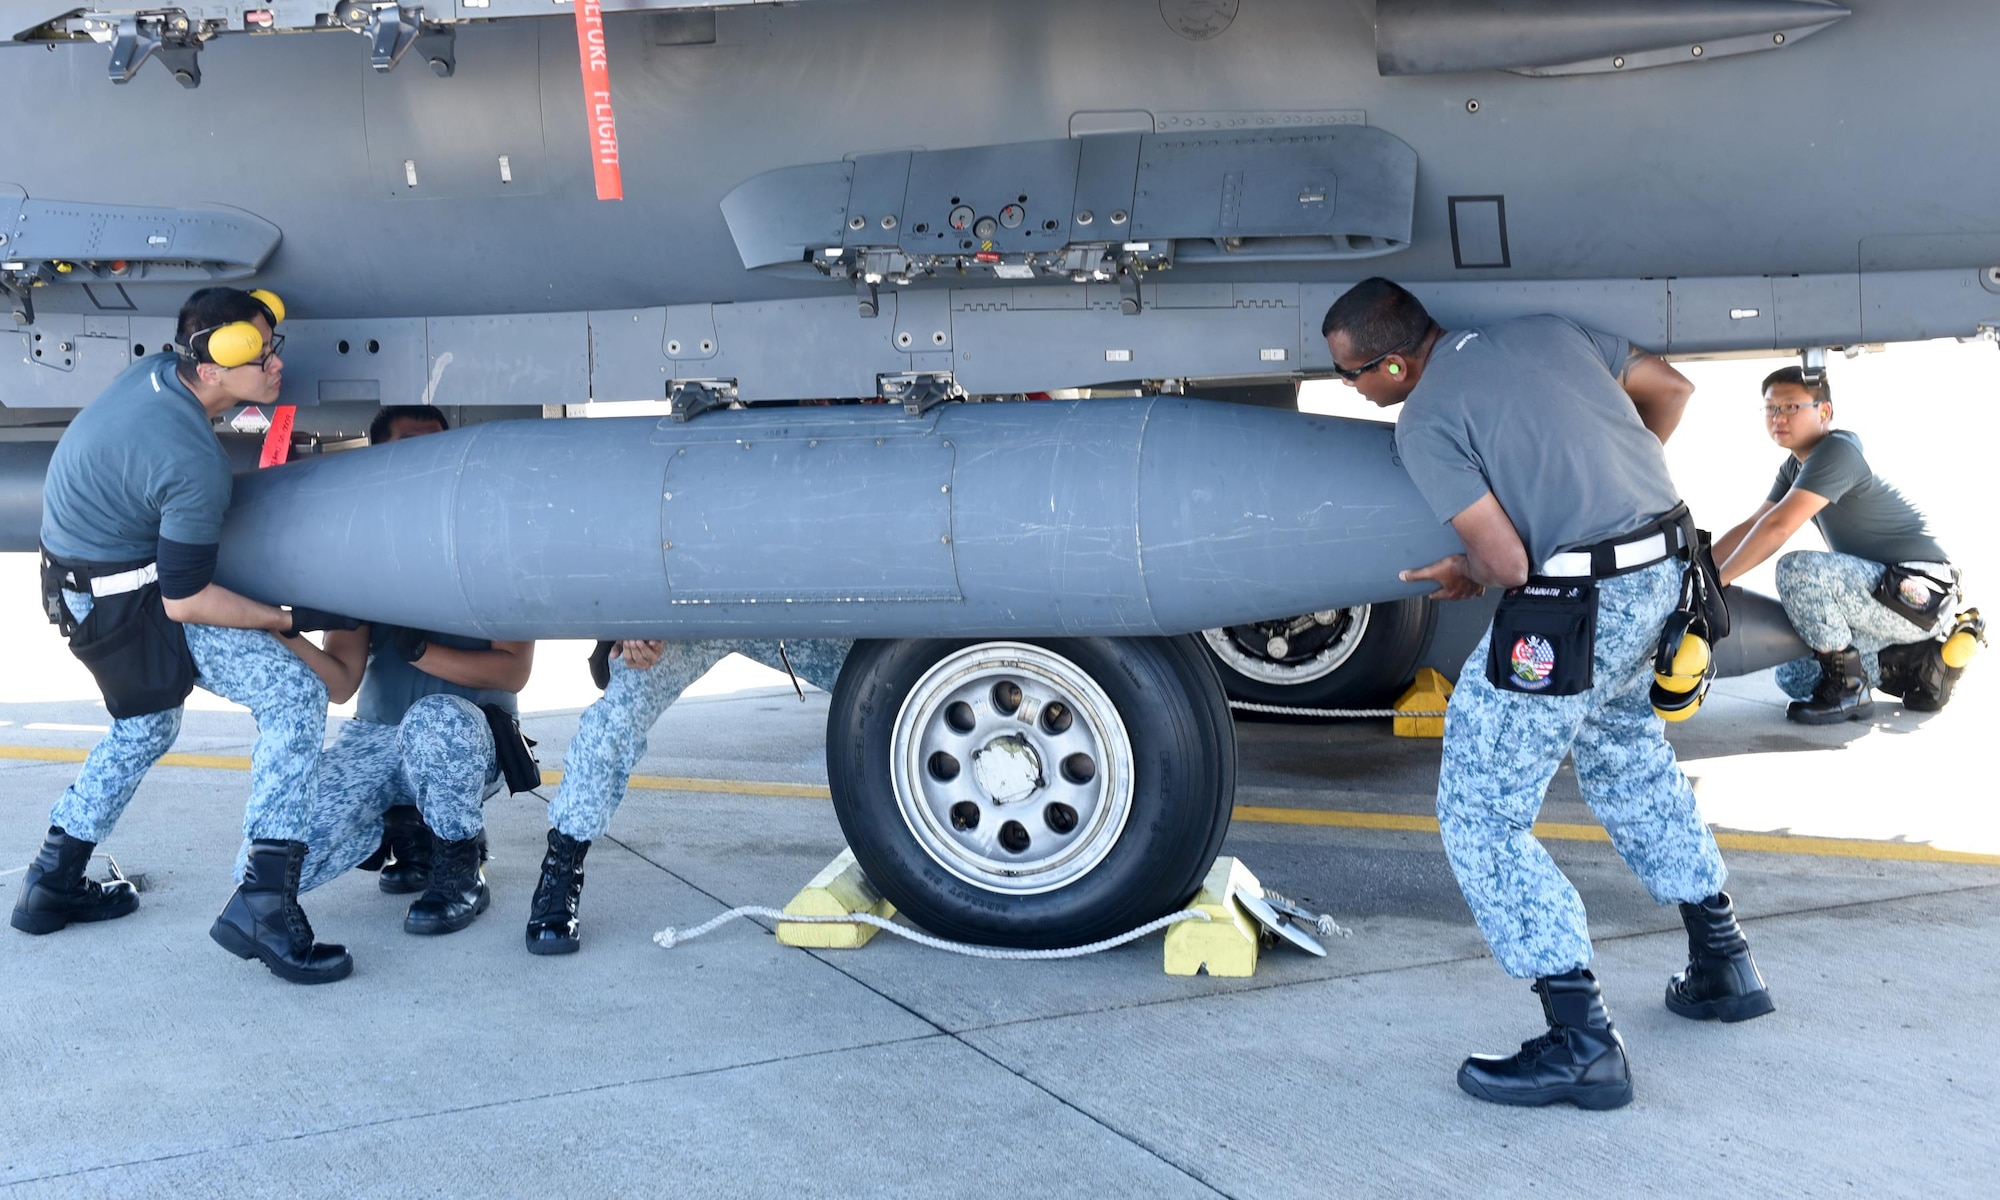 Singapore air force maintainers from the 428th Fighter Squadron, Mountain Home Air Force Base, Idaho, load fuel tanks onto an F-15 Eagle at Tyndall Air Force Base, Fla., Nov. 17, 2016. The Singapore air force took part in the Weapons Systems Evaluation program, an exercise intended to evaluate weapon systems in their entirety, including aircraft, weapon delivery system, weapon, aircrew, technical data and maintenance. (U.S. Air Force photo by Airman 1st Class Cody R. Miller/Released)